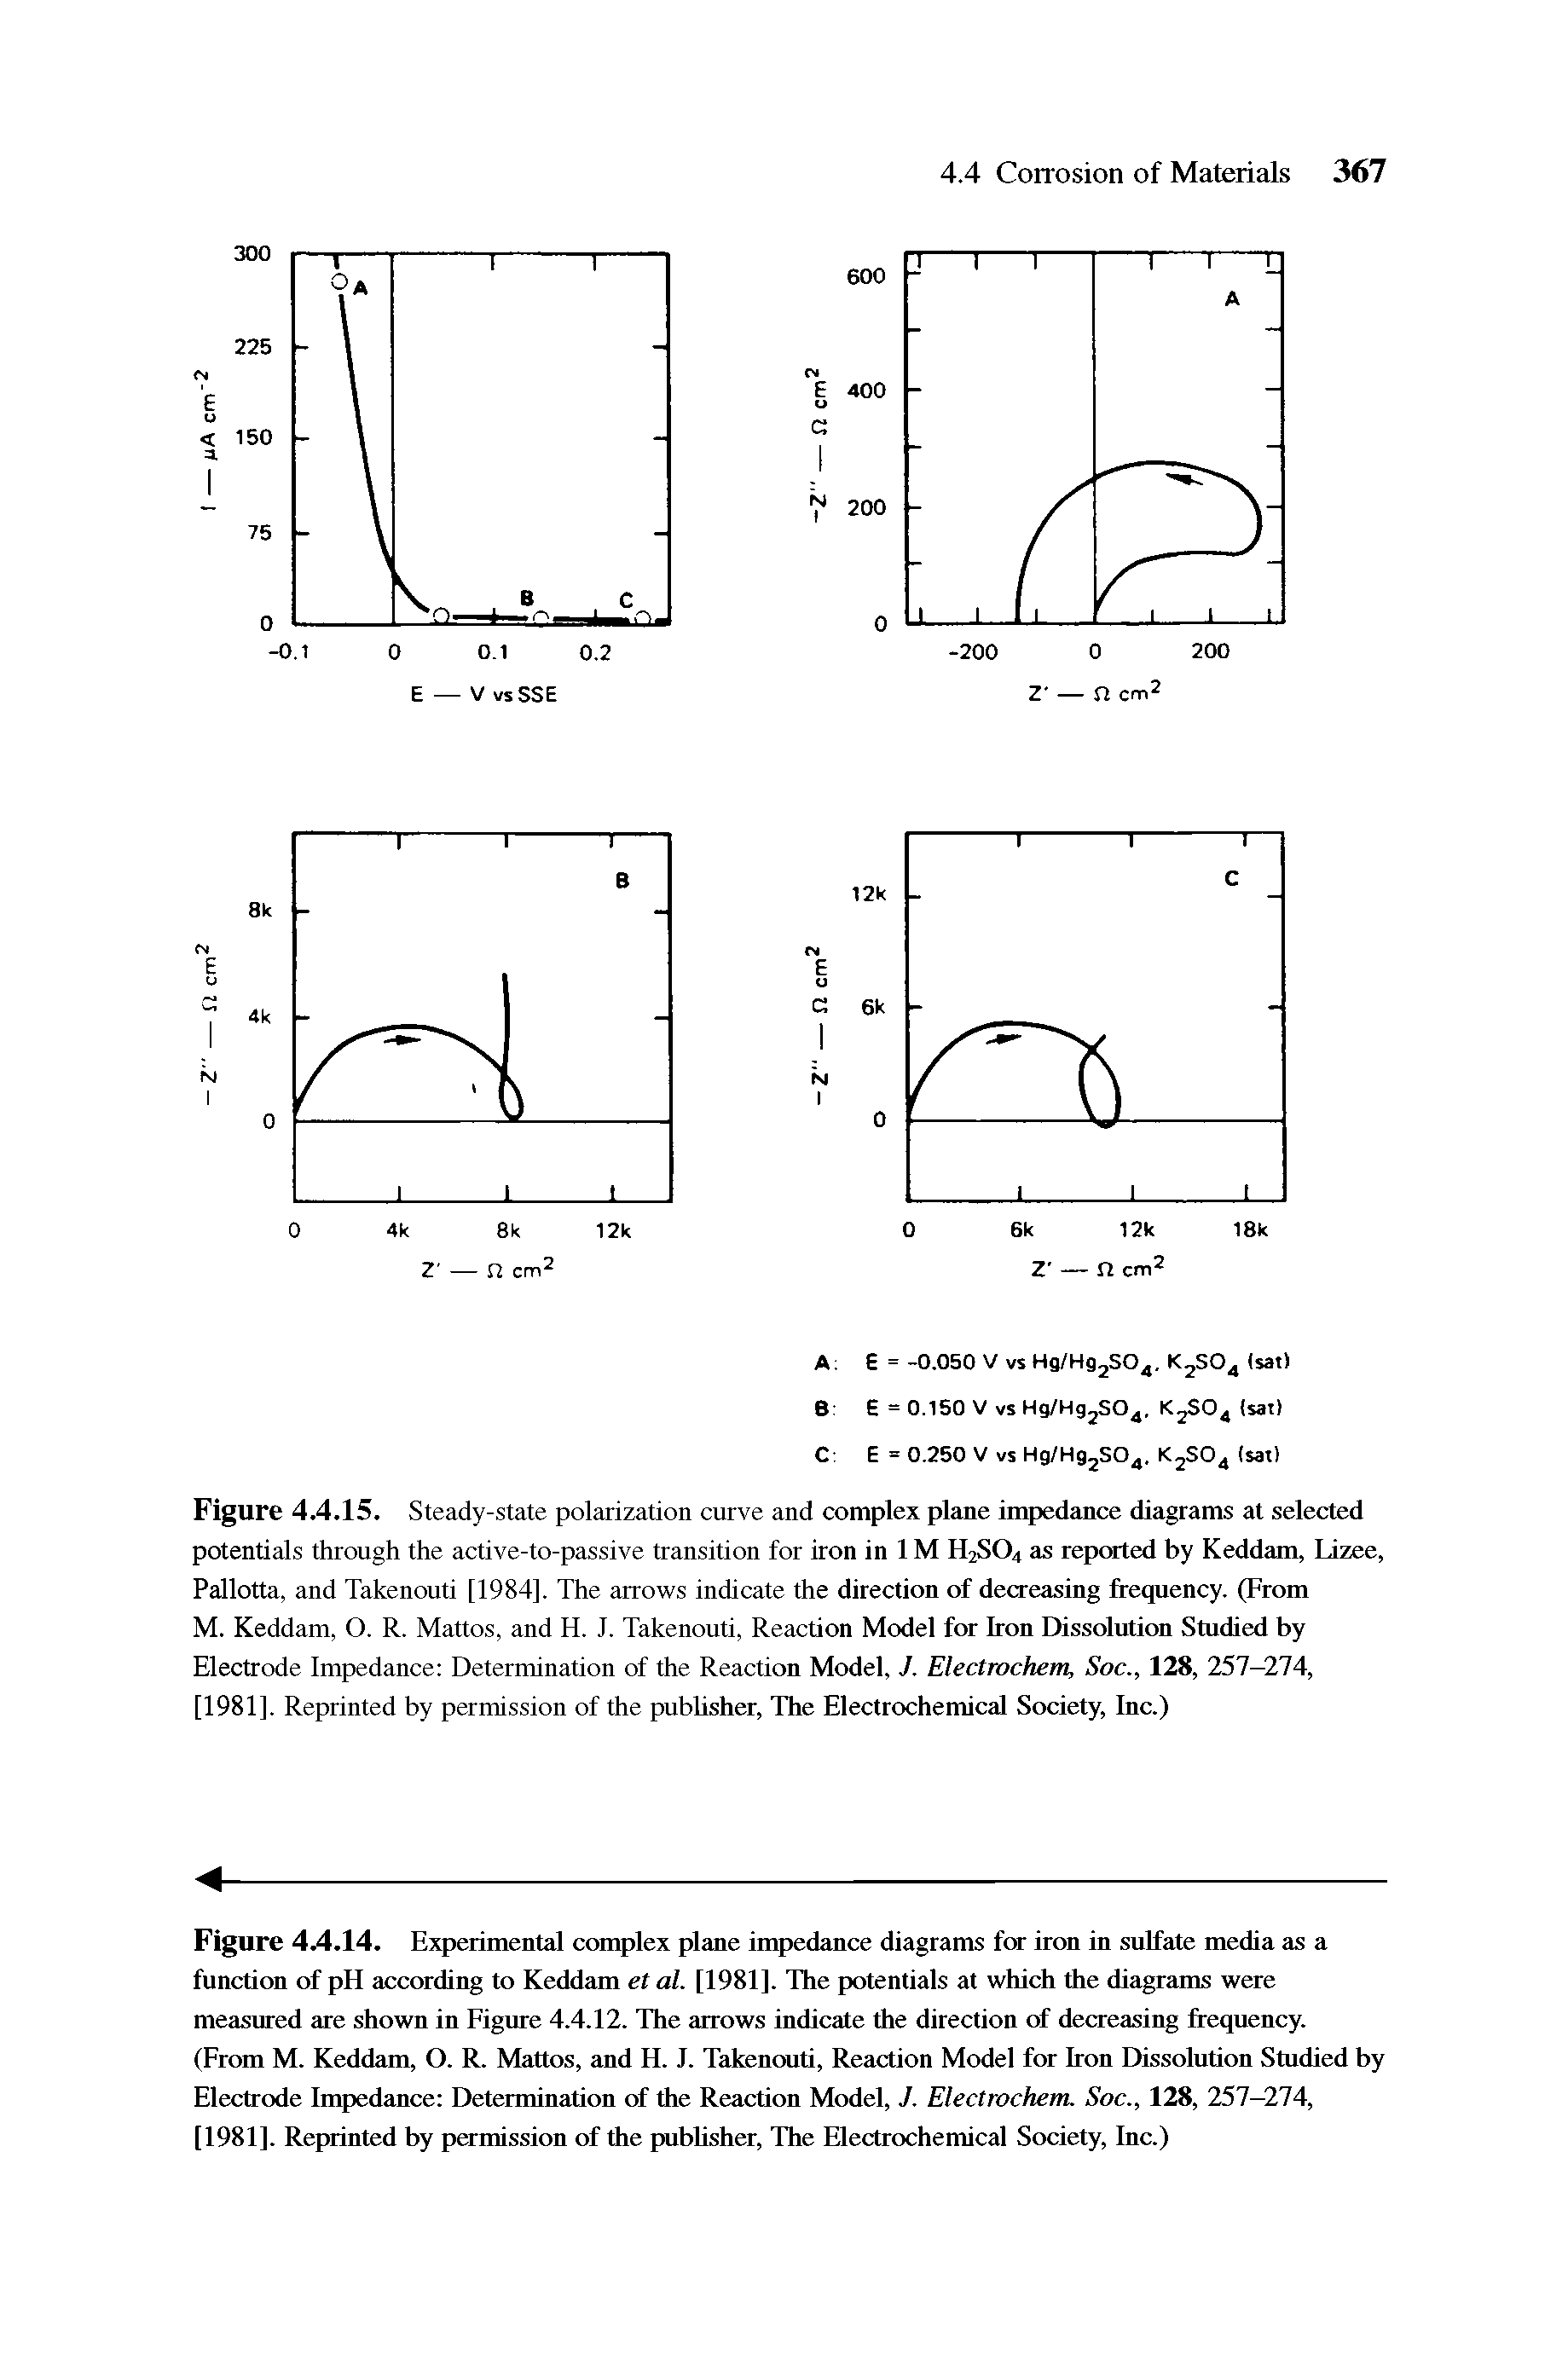 Figure 4.4.15. Steady-state polarization curve and complex plane impedance diagrams at selected potentials through the active-to-passive transition for iron in 1M H2SO4 as repated by Keddam, Lizee, Pallotta, and Takenouti [1984]. The arrows indicate the direction of decreasing fret[uency. (From M. Keddam, O. R. Mattos, and H. J. Takenouti, Reaction Model for Iron Dissolution Studied by Electrode Impedance Determination of the Reaction Model, J. Electrochem, Soc., 128, 251—214, [1981]. Reprinted by permission of the publisher, The Electrochemical Society, Inc.)...